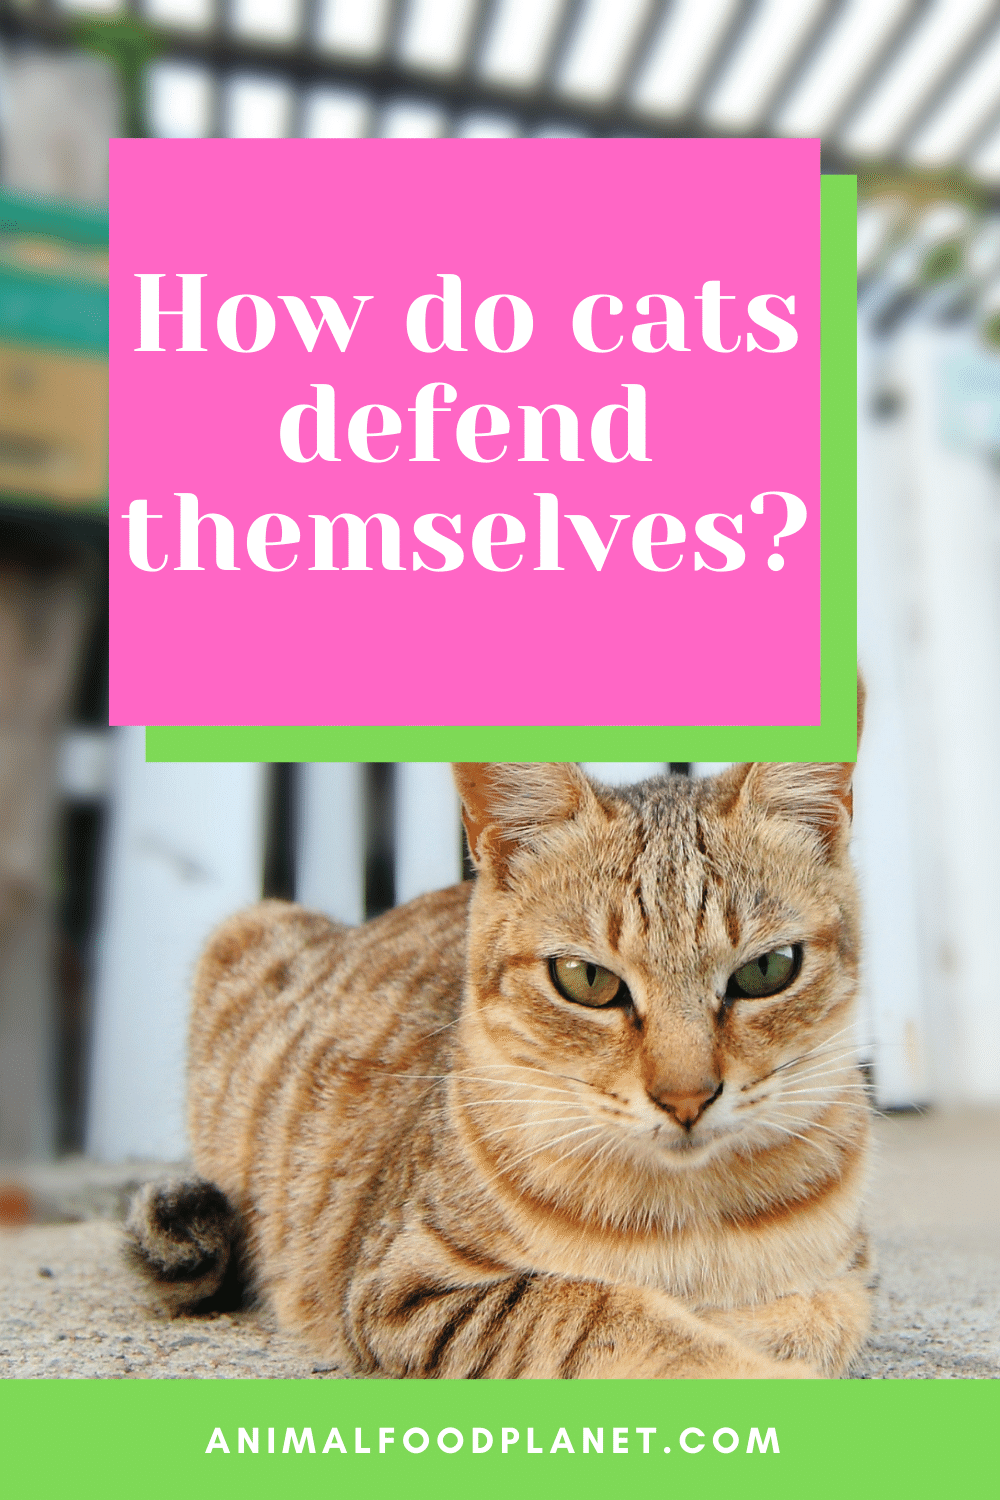 How do cats defend themselves